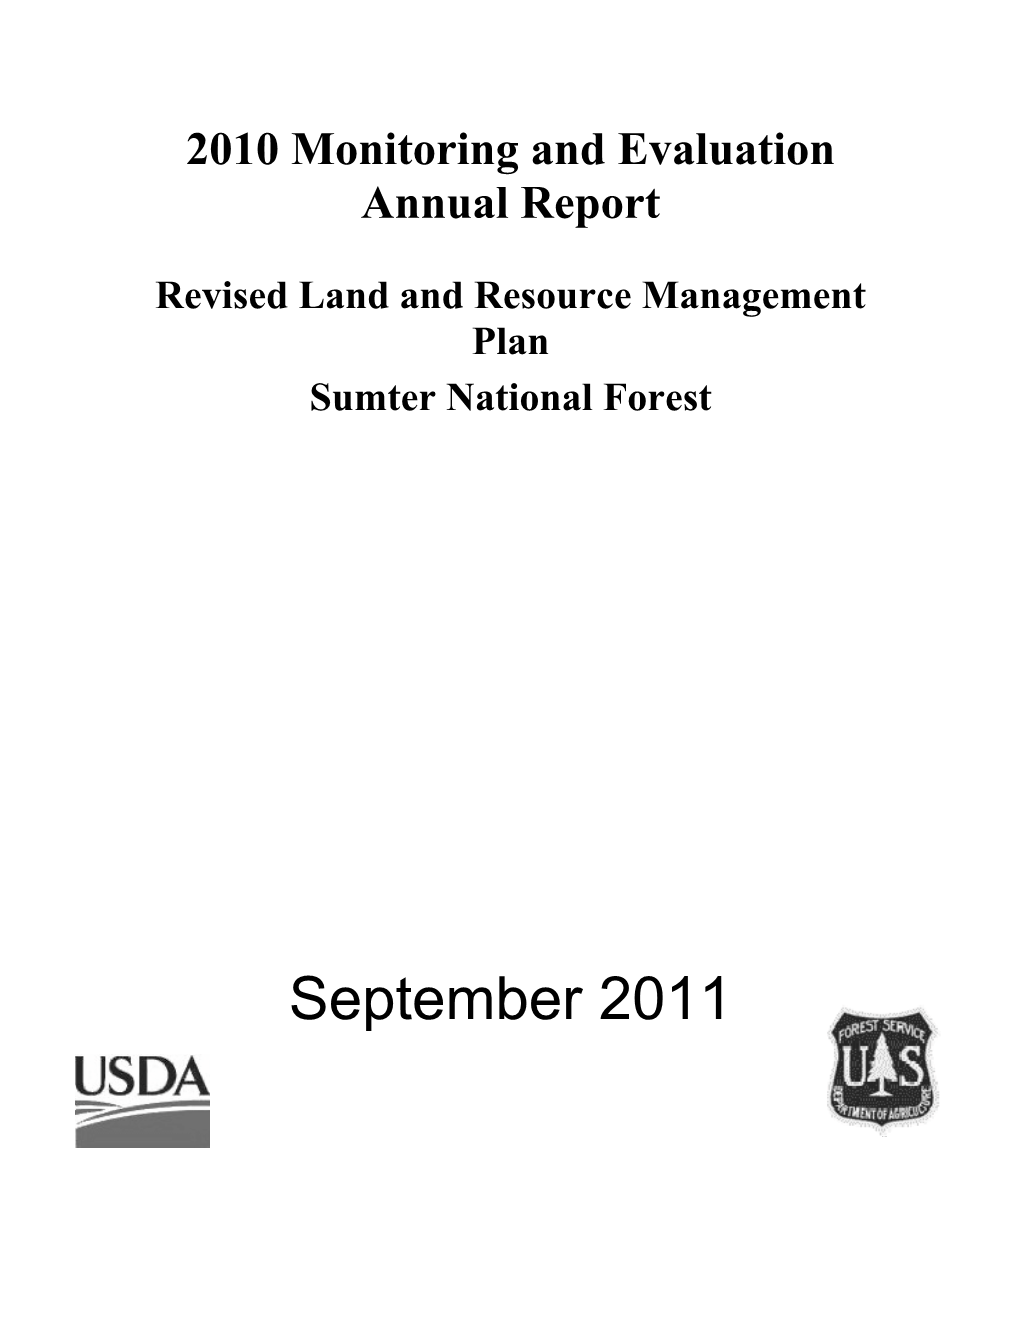 FY 10 Monitoring Report-Sumter National Forest